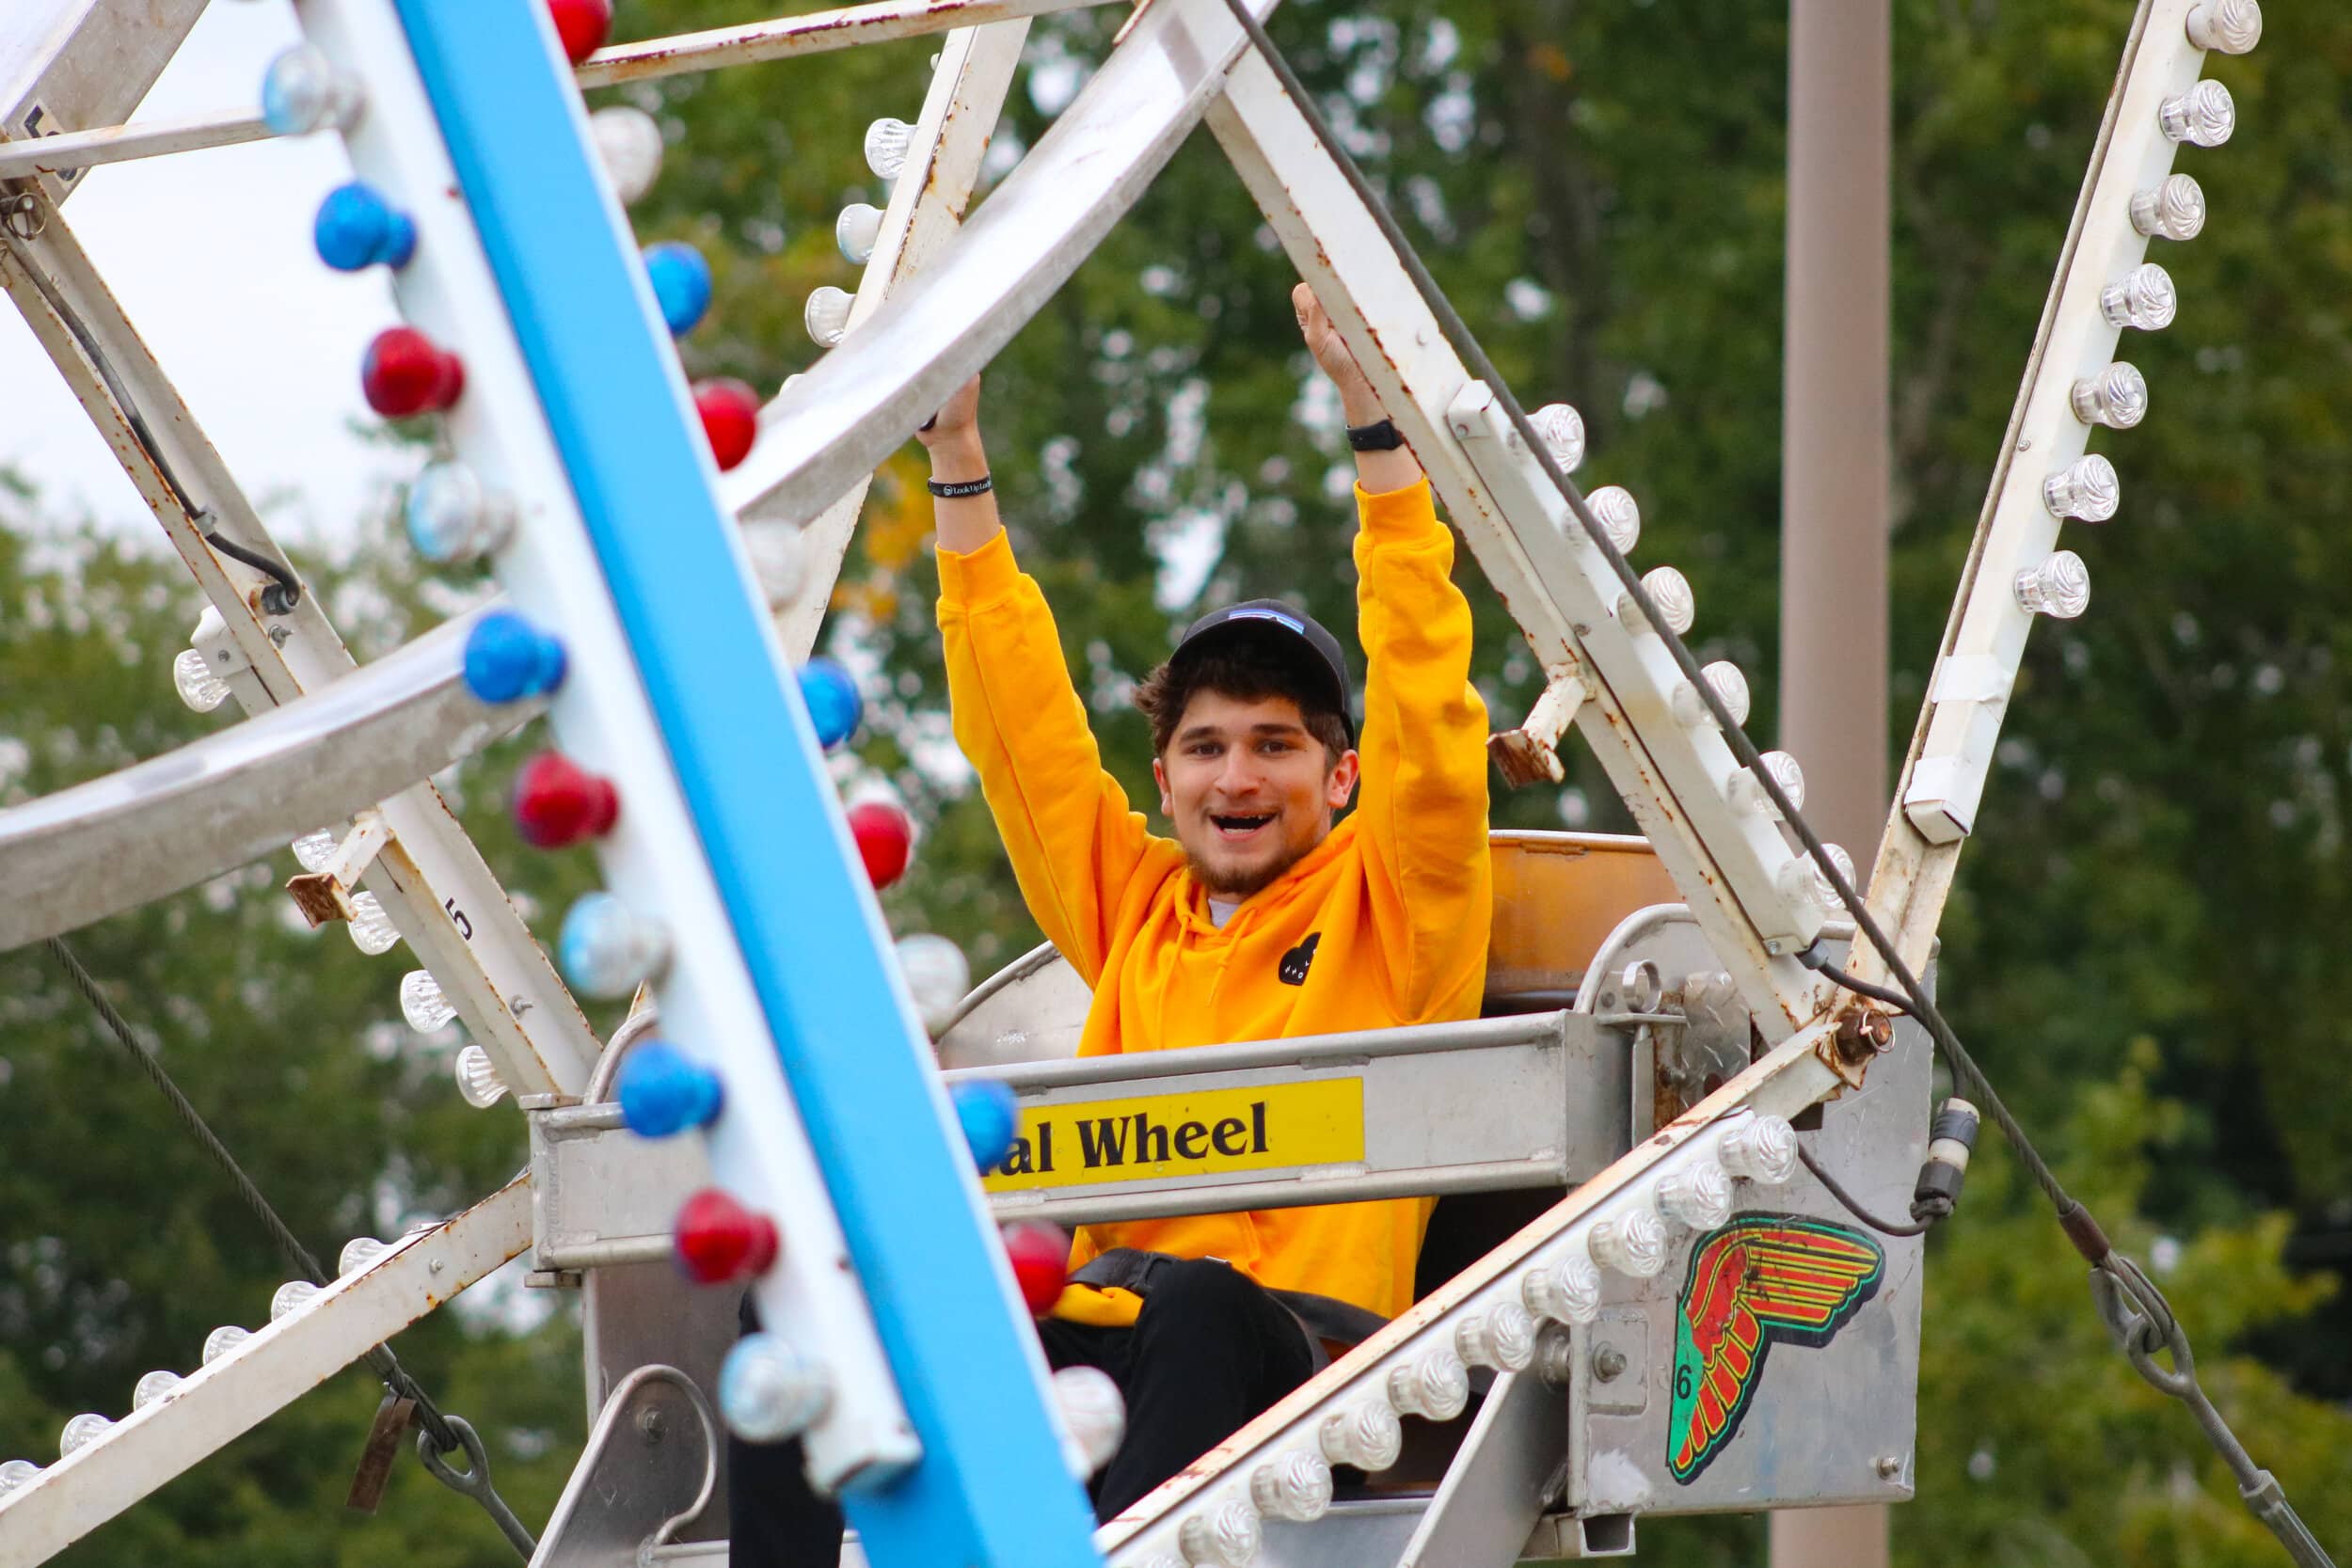 Sophomore Bryce Faulkenberry shouts for joy as he rides the Ferris wheel.